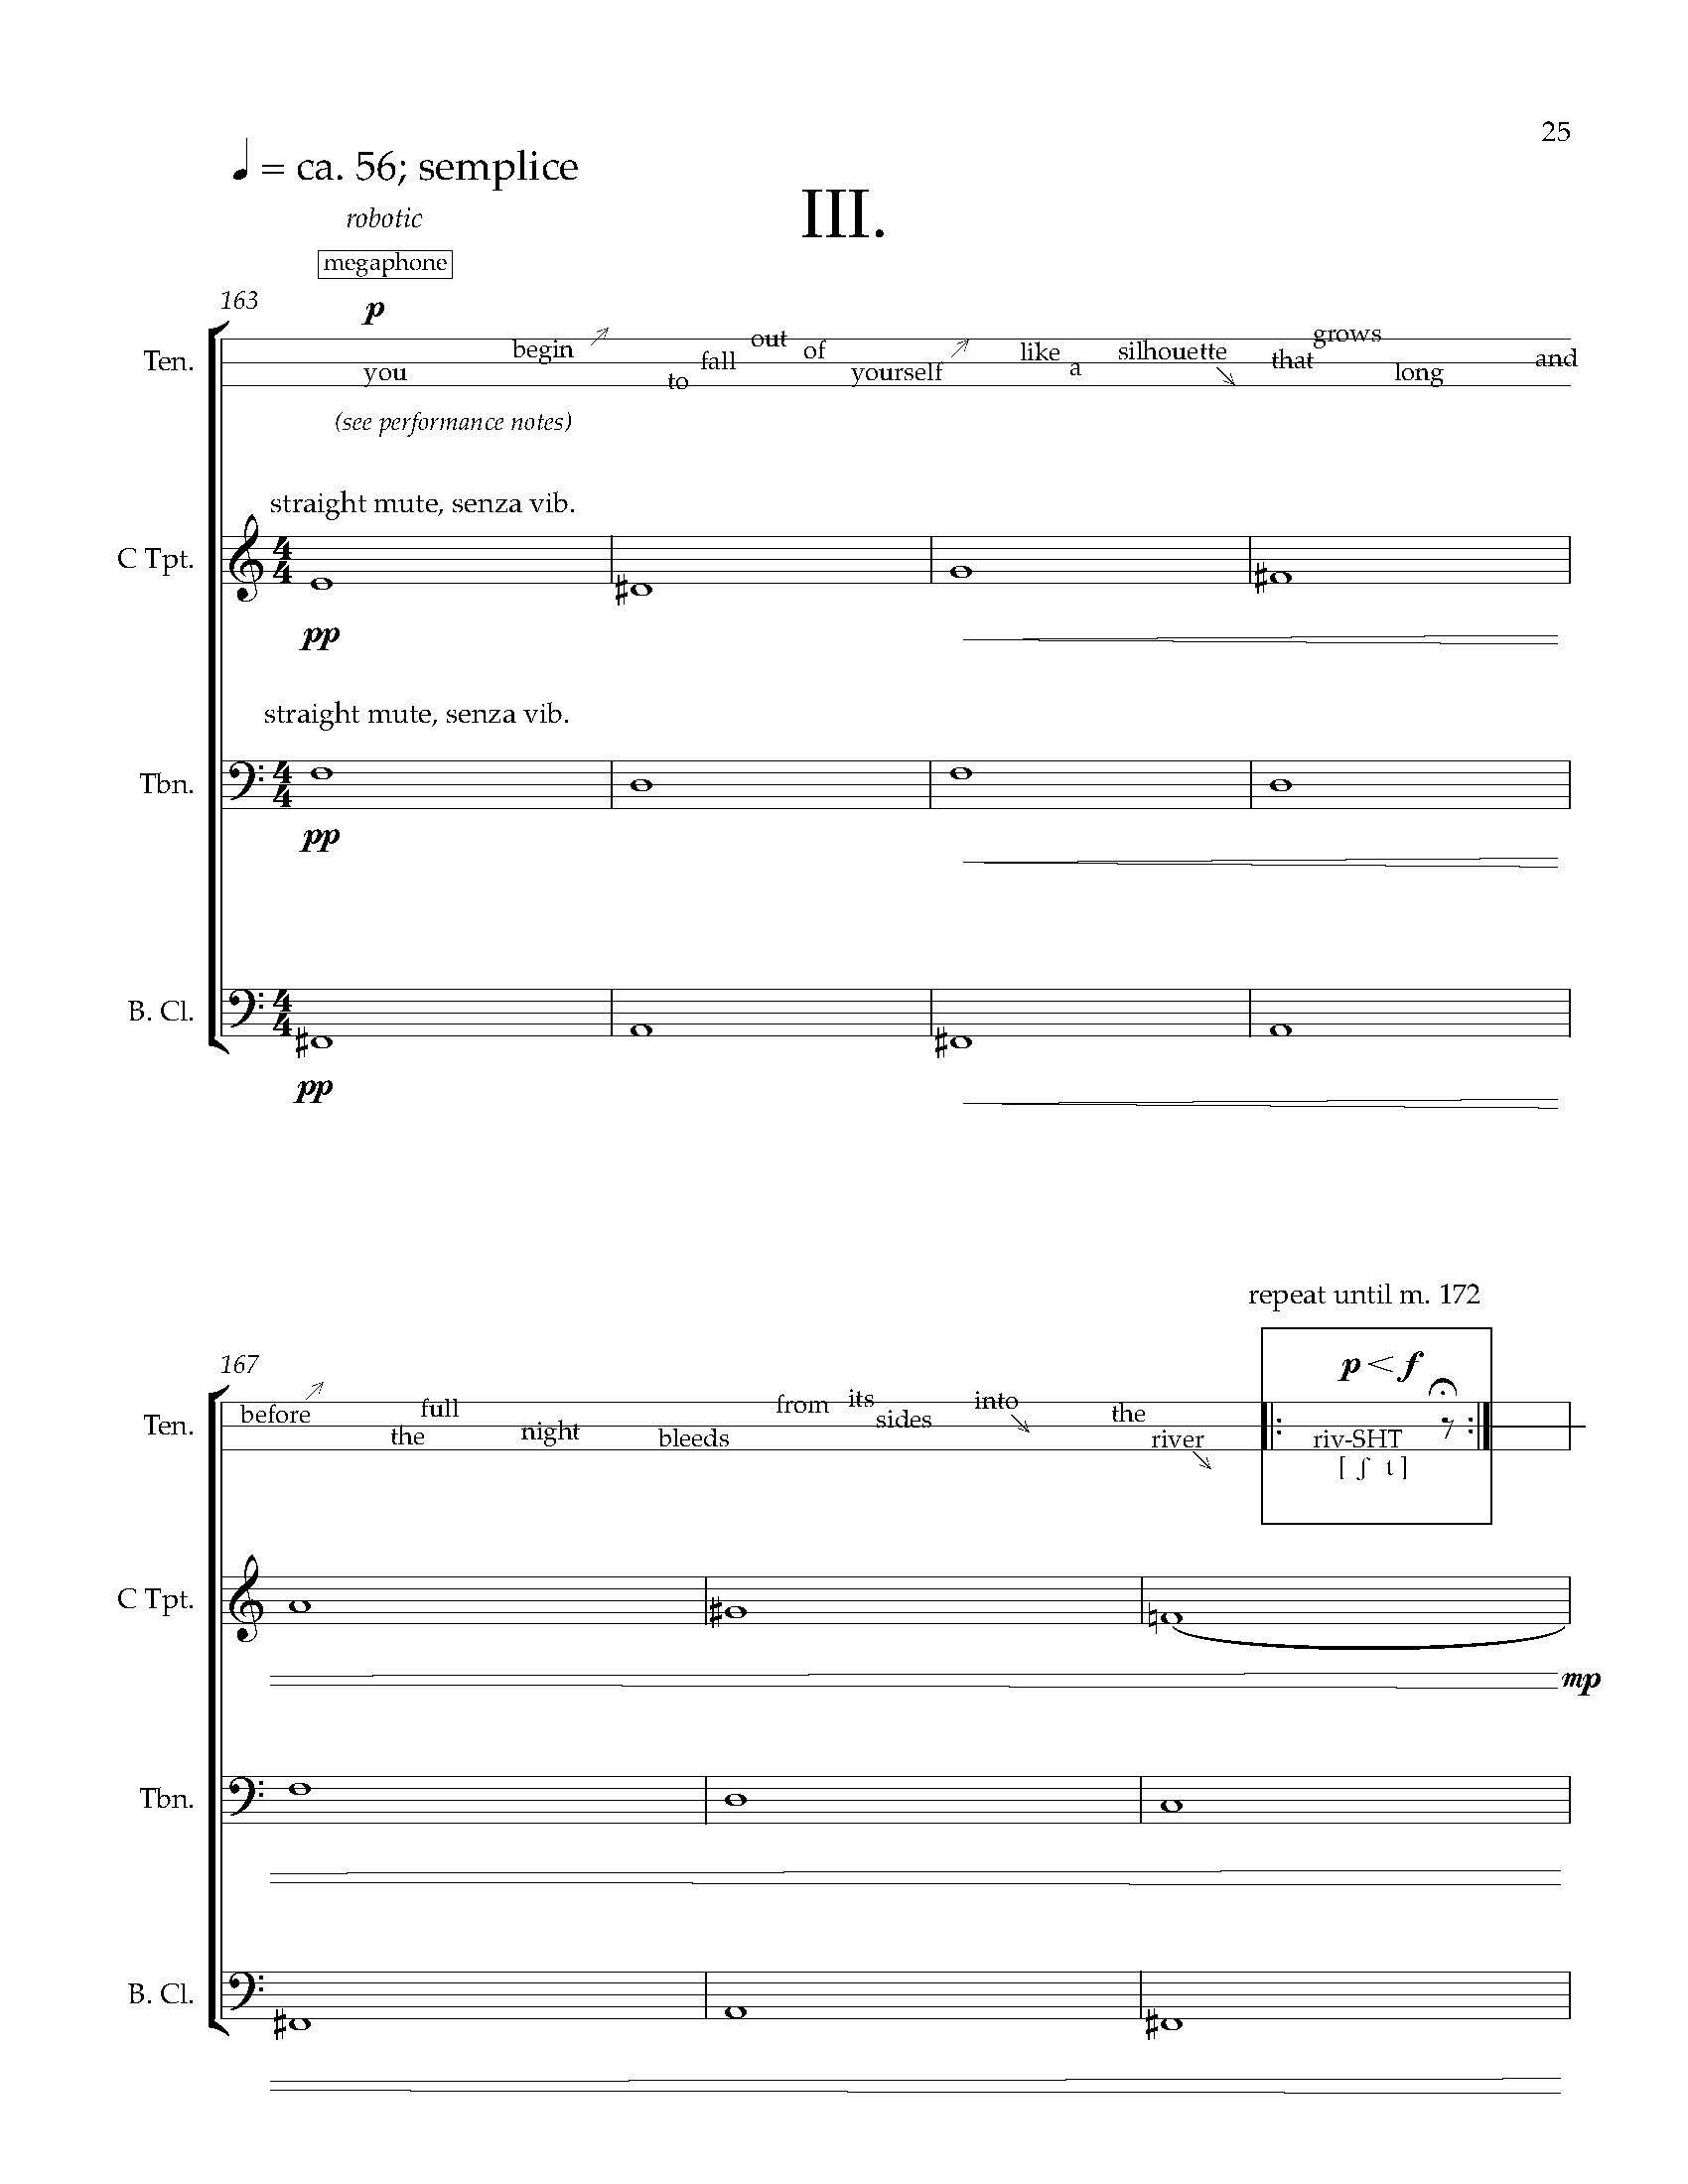 Many Worlds [1] - Complete Score_Page_34.jpg